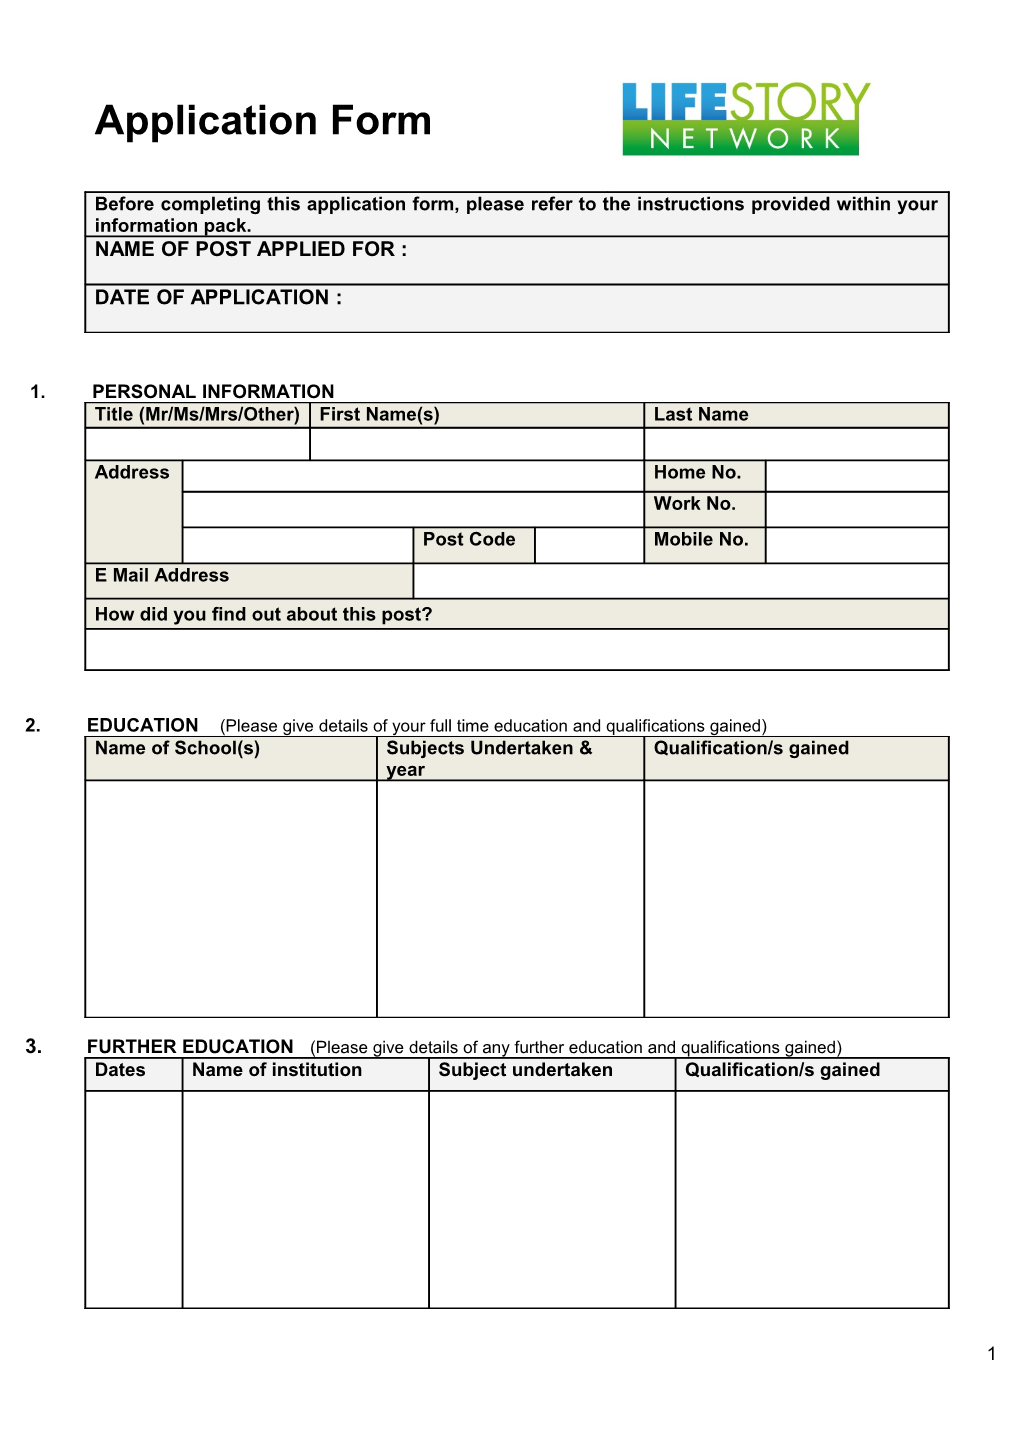 Groundwork Application Form s1